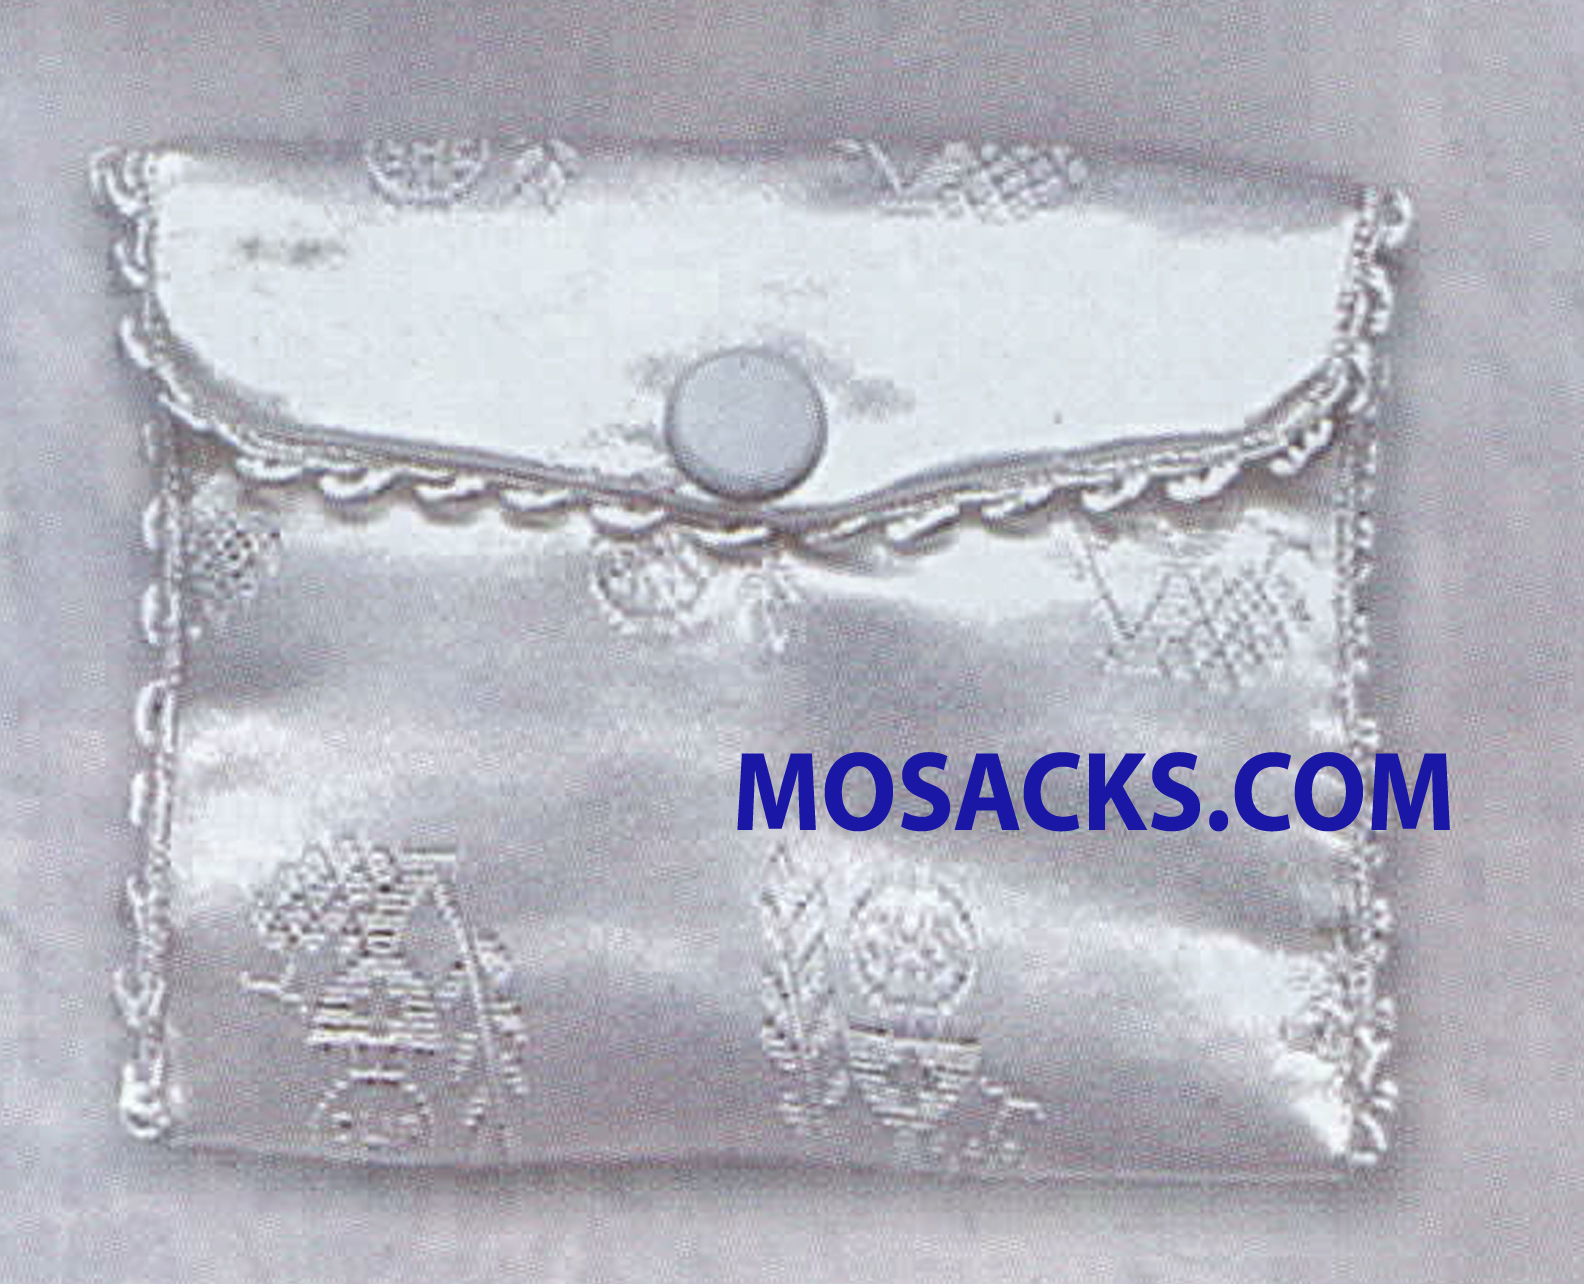 Rosary Case in White Satin Brocade with Chalice and Wheat Design 64-83012